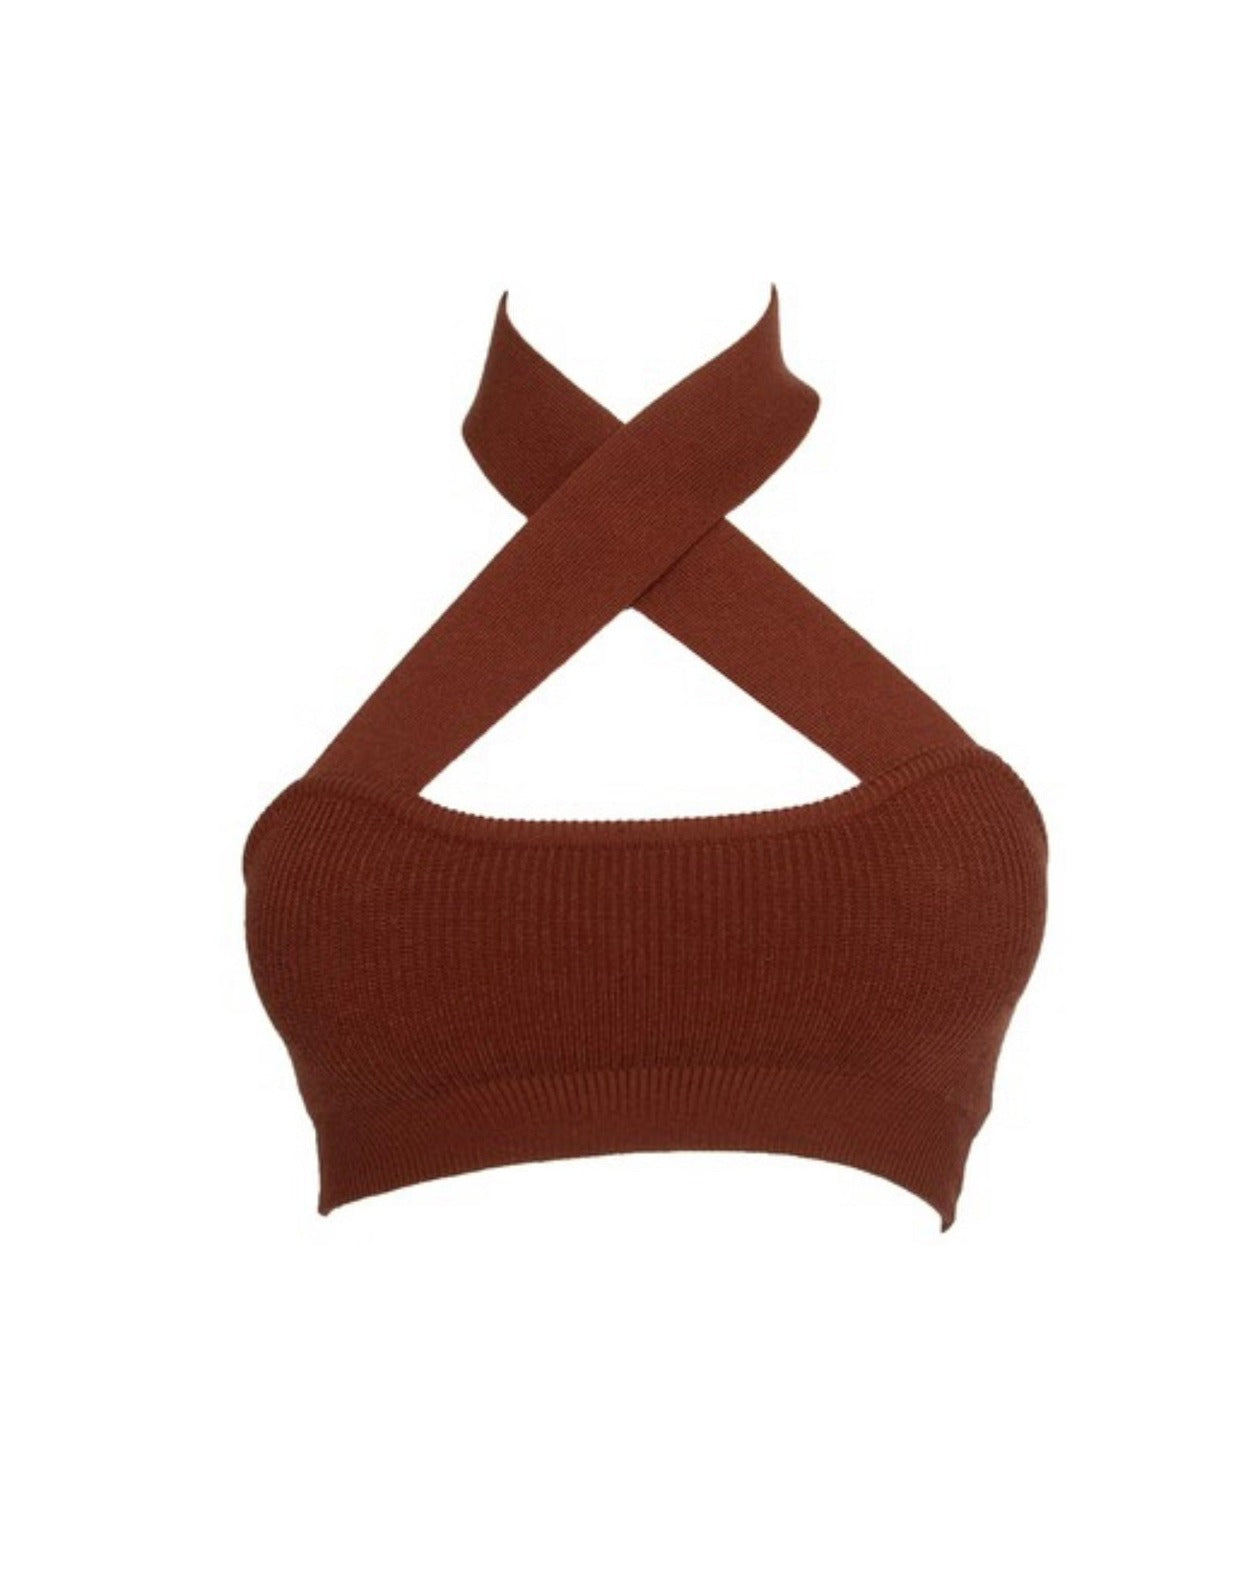 Model wearing the Brown Rib Knit Halter Twist Crop Top, showcasing the unique halter twist detail and form-fitting silhouette.